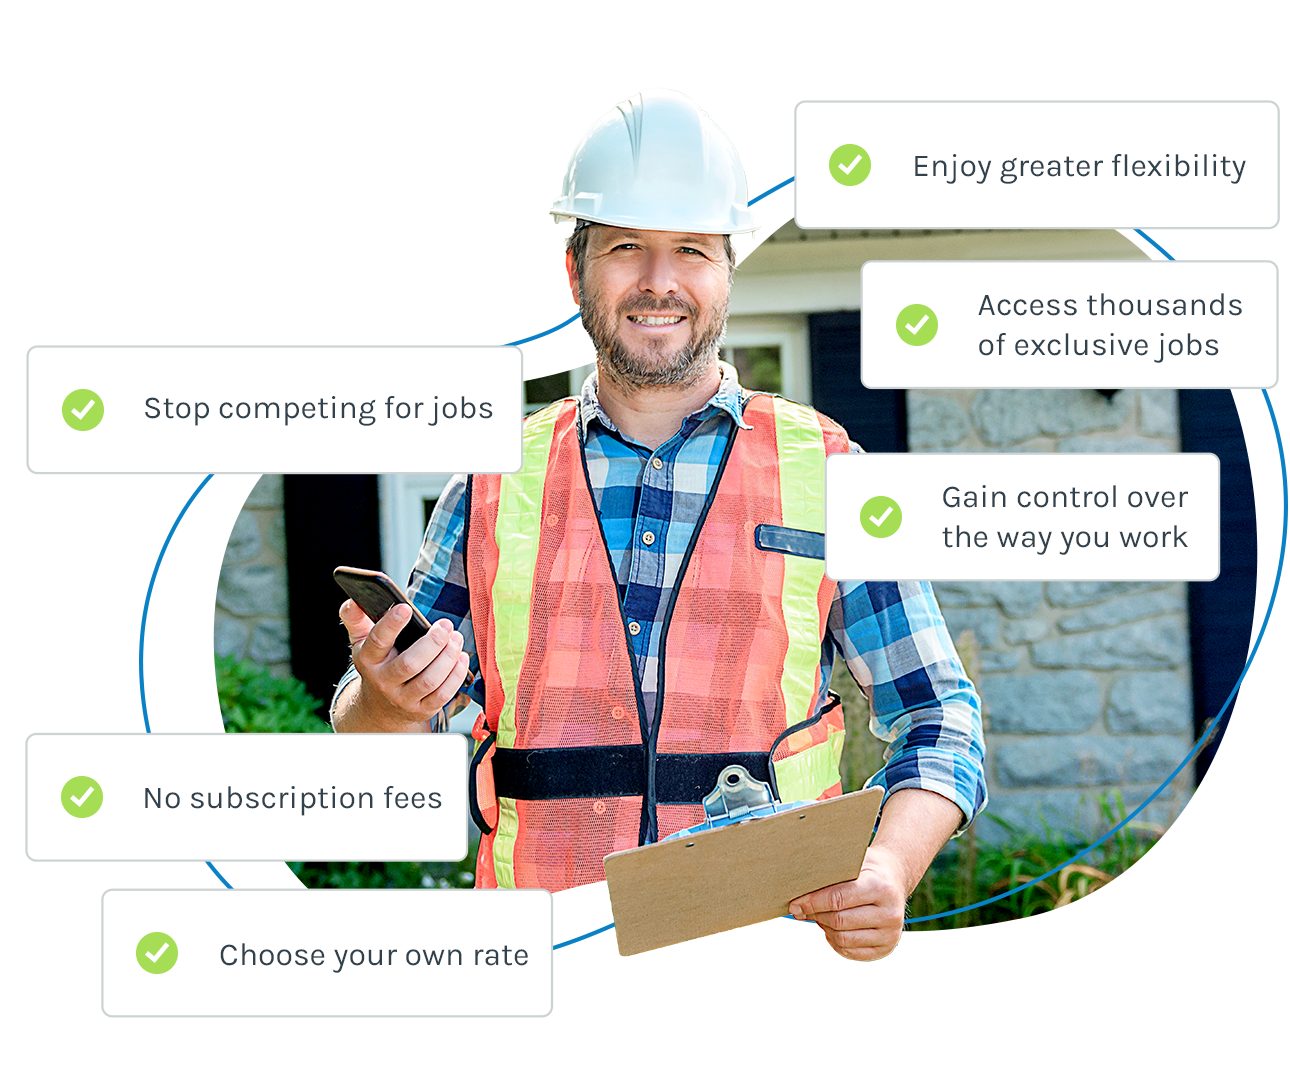 A contractor with checkbox illustrations of the benefits of Fixflo including no subscription fees and greater flexibility